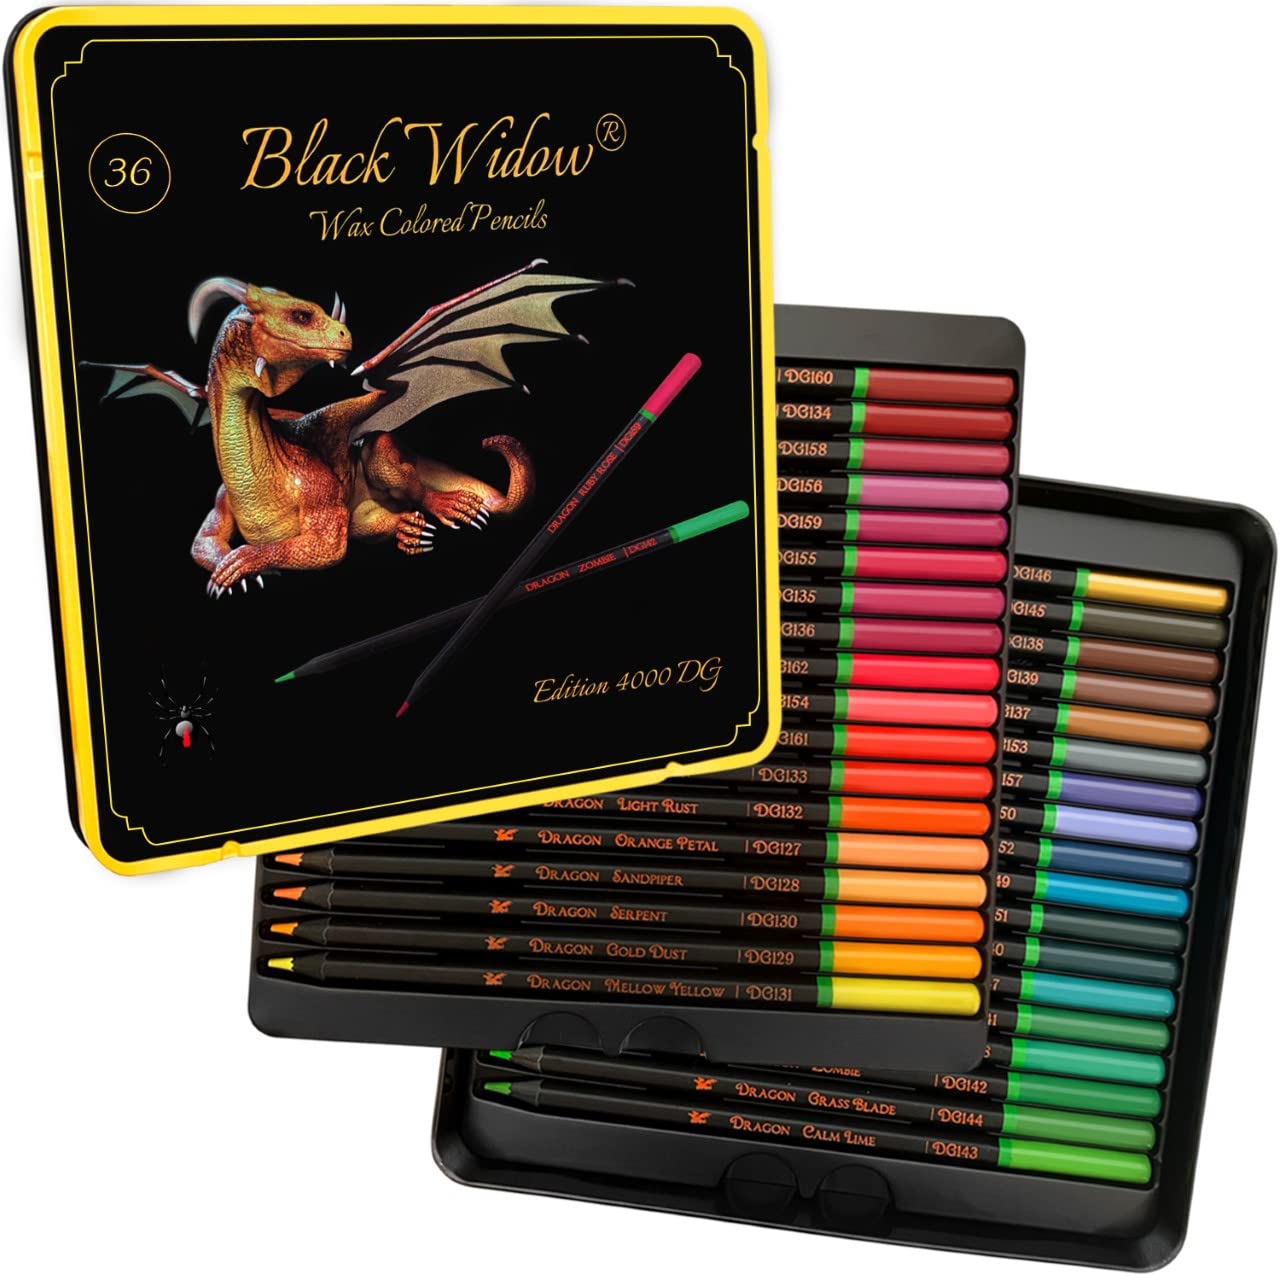 Black Widow Colored Pencils for Adults - 24 Coloring Pencils - Smooth Pigments Color Pencil Set - Fantastic for Adult Coloring Books and Drawing